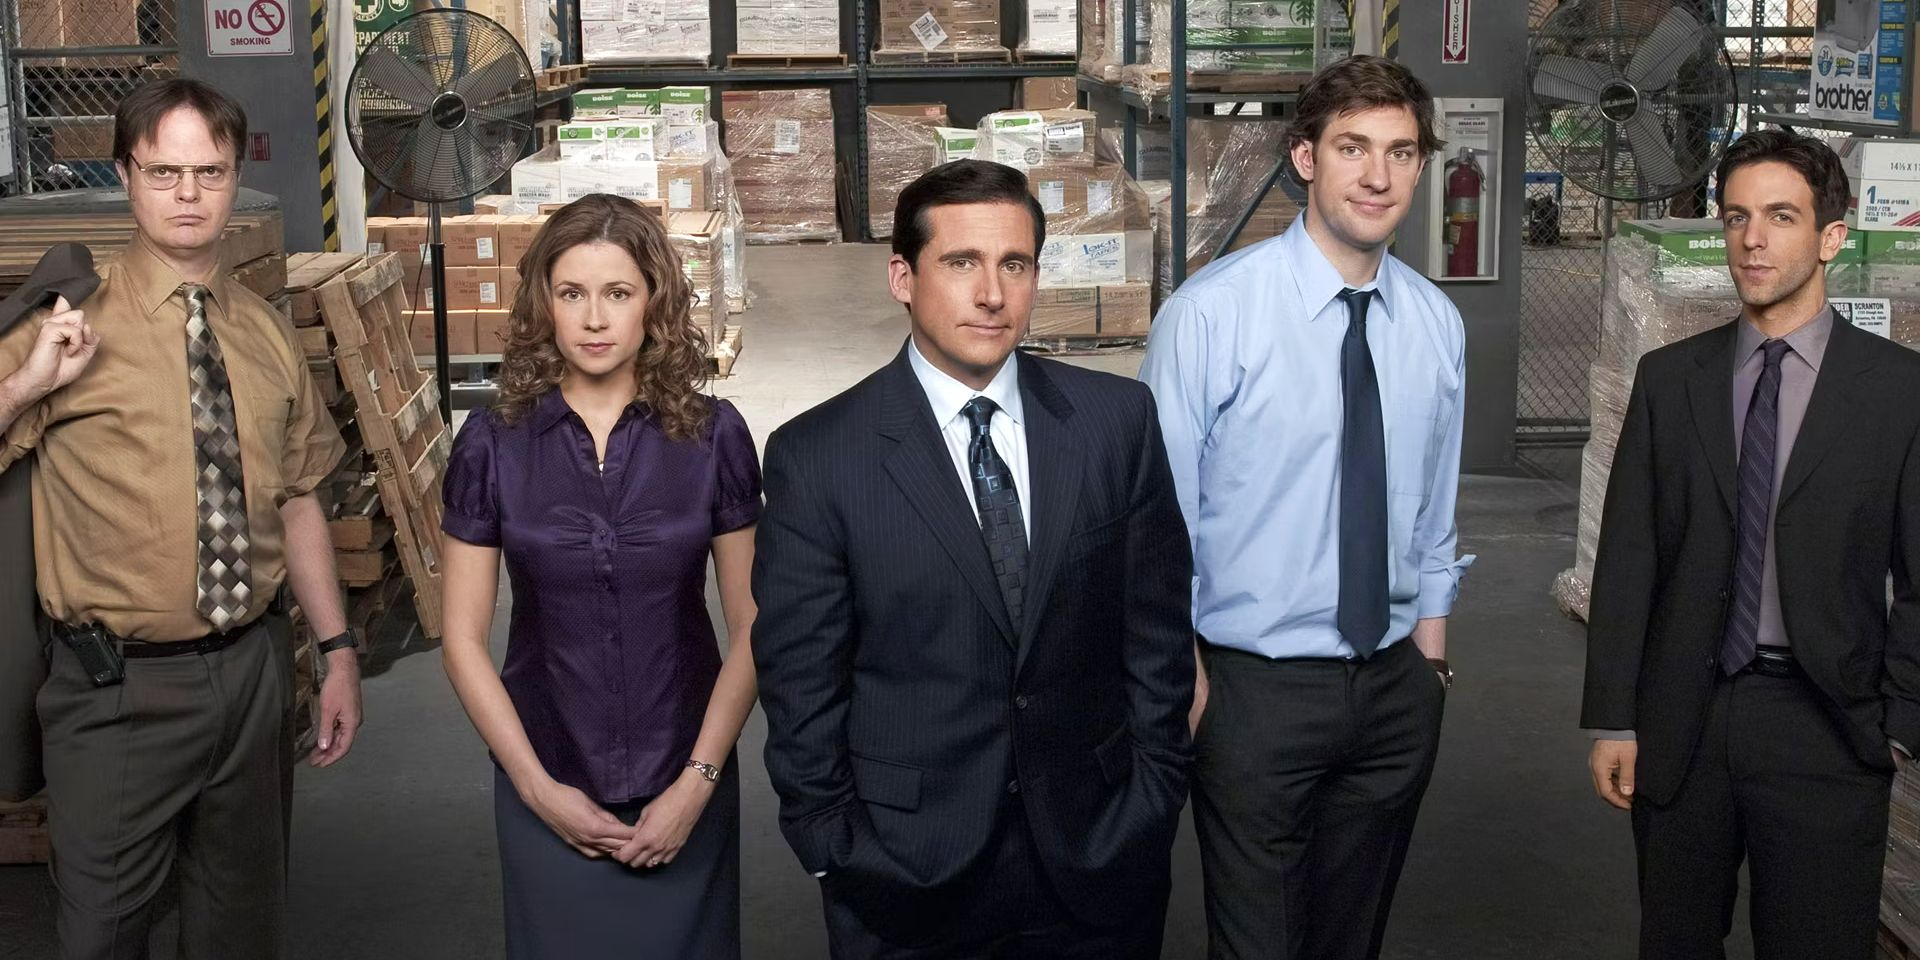 The Office cast of main characters - Dwight, Pam, Michael, Jim, Ryan